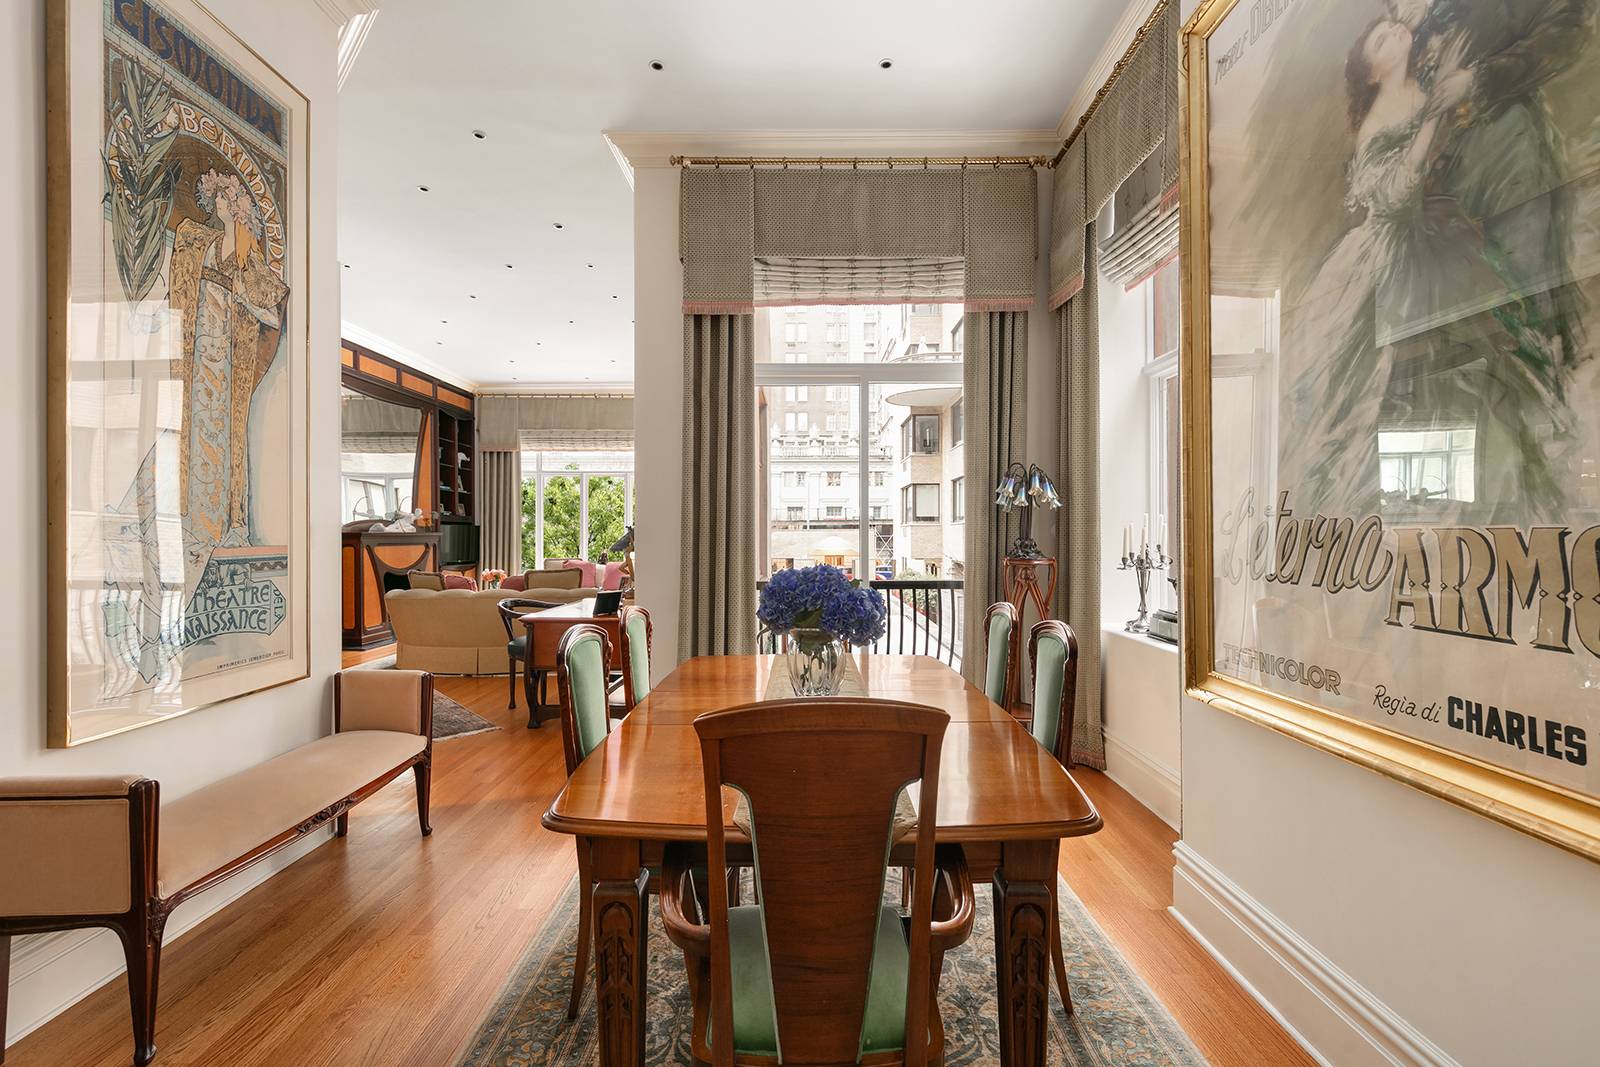 Enviably located on a prime Upper East Side block known for its beautiful townhouses, this exquisite two bedroom, two and half bathroom duplex boasts spectacular proportions and a rarely seen ...